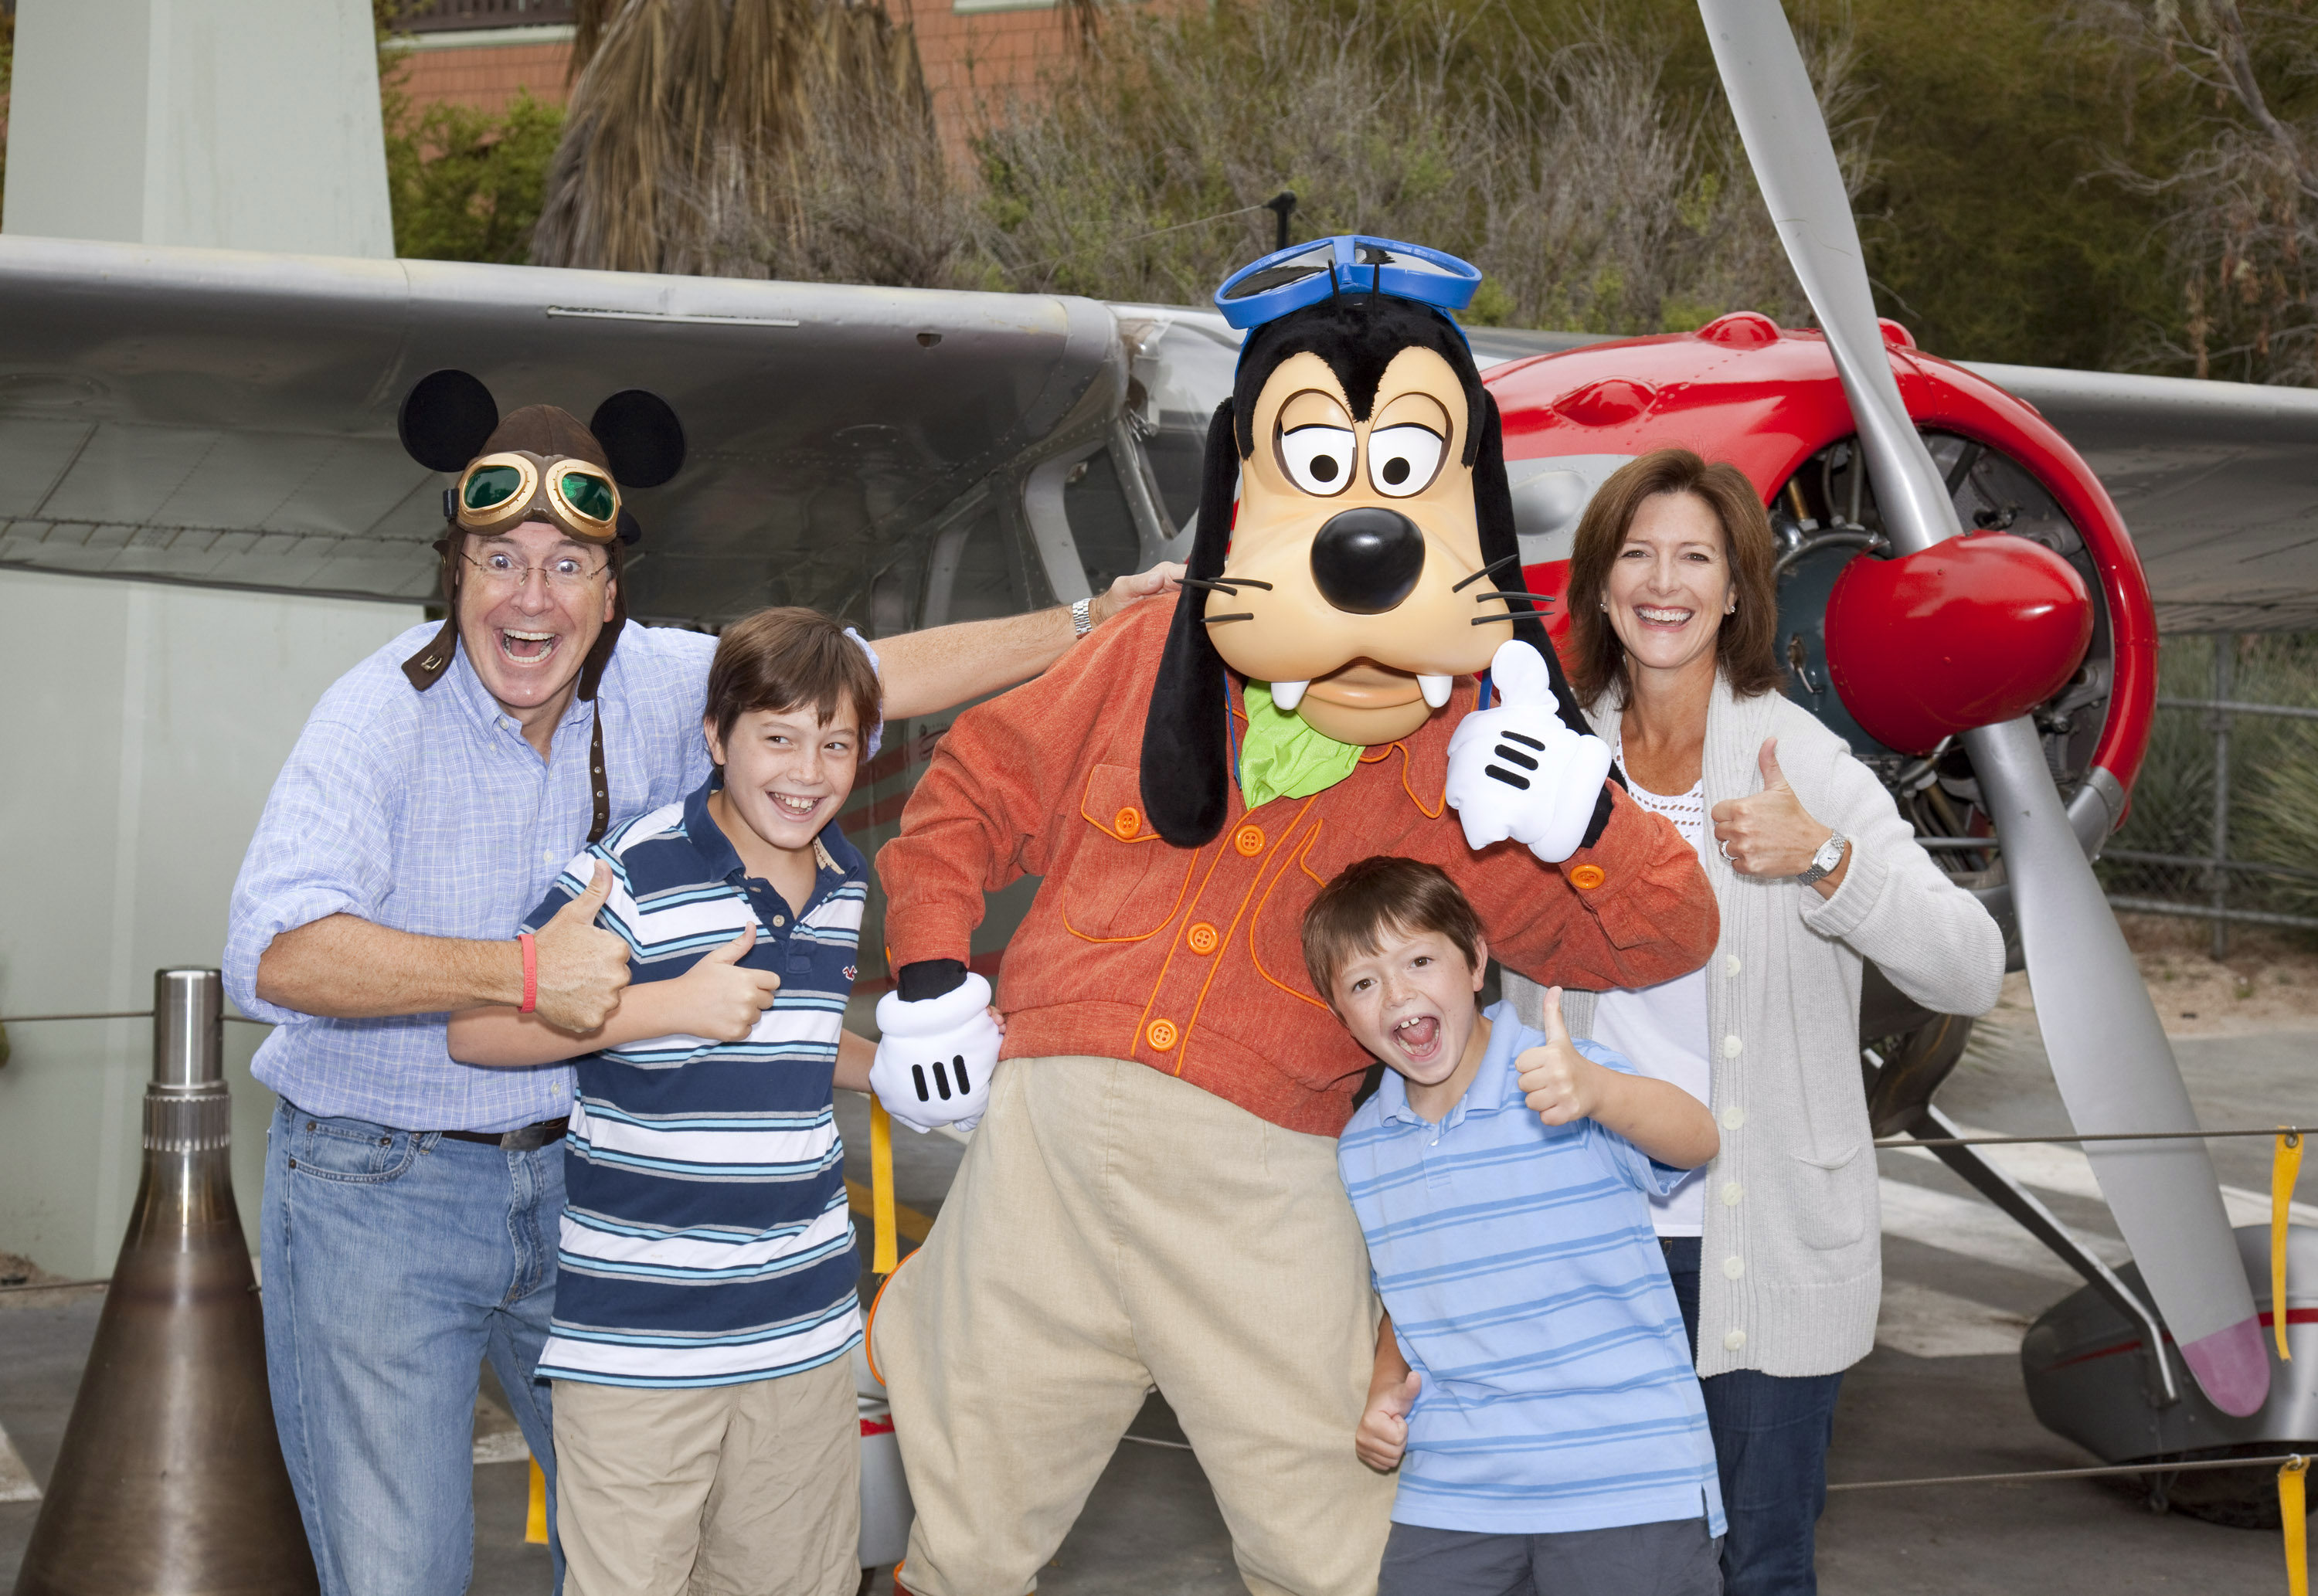 Stephen Colbert and Evelyn Colbert with their sons, Peter Colbert and John Colbert, pose with Goofy outside the Soarin Over California attraction at Disney California Adventure Park on August 28, 2010, in Anaheim, California. | Source: Getty Images